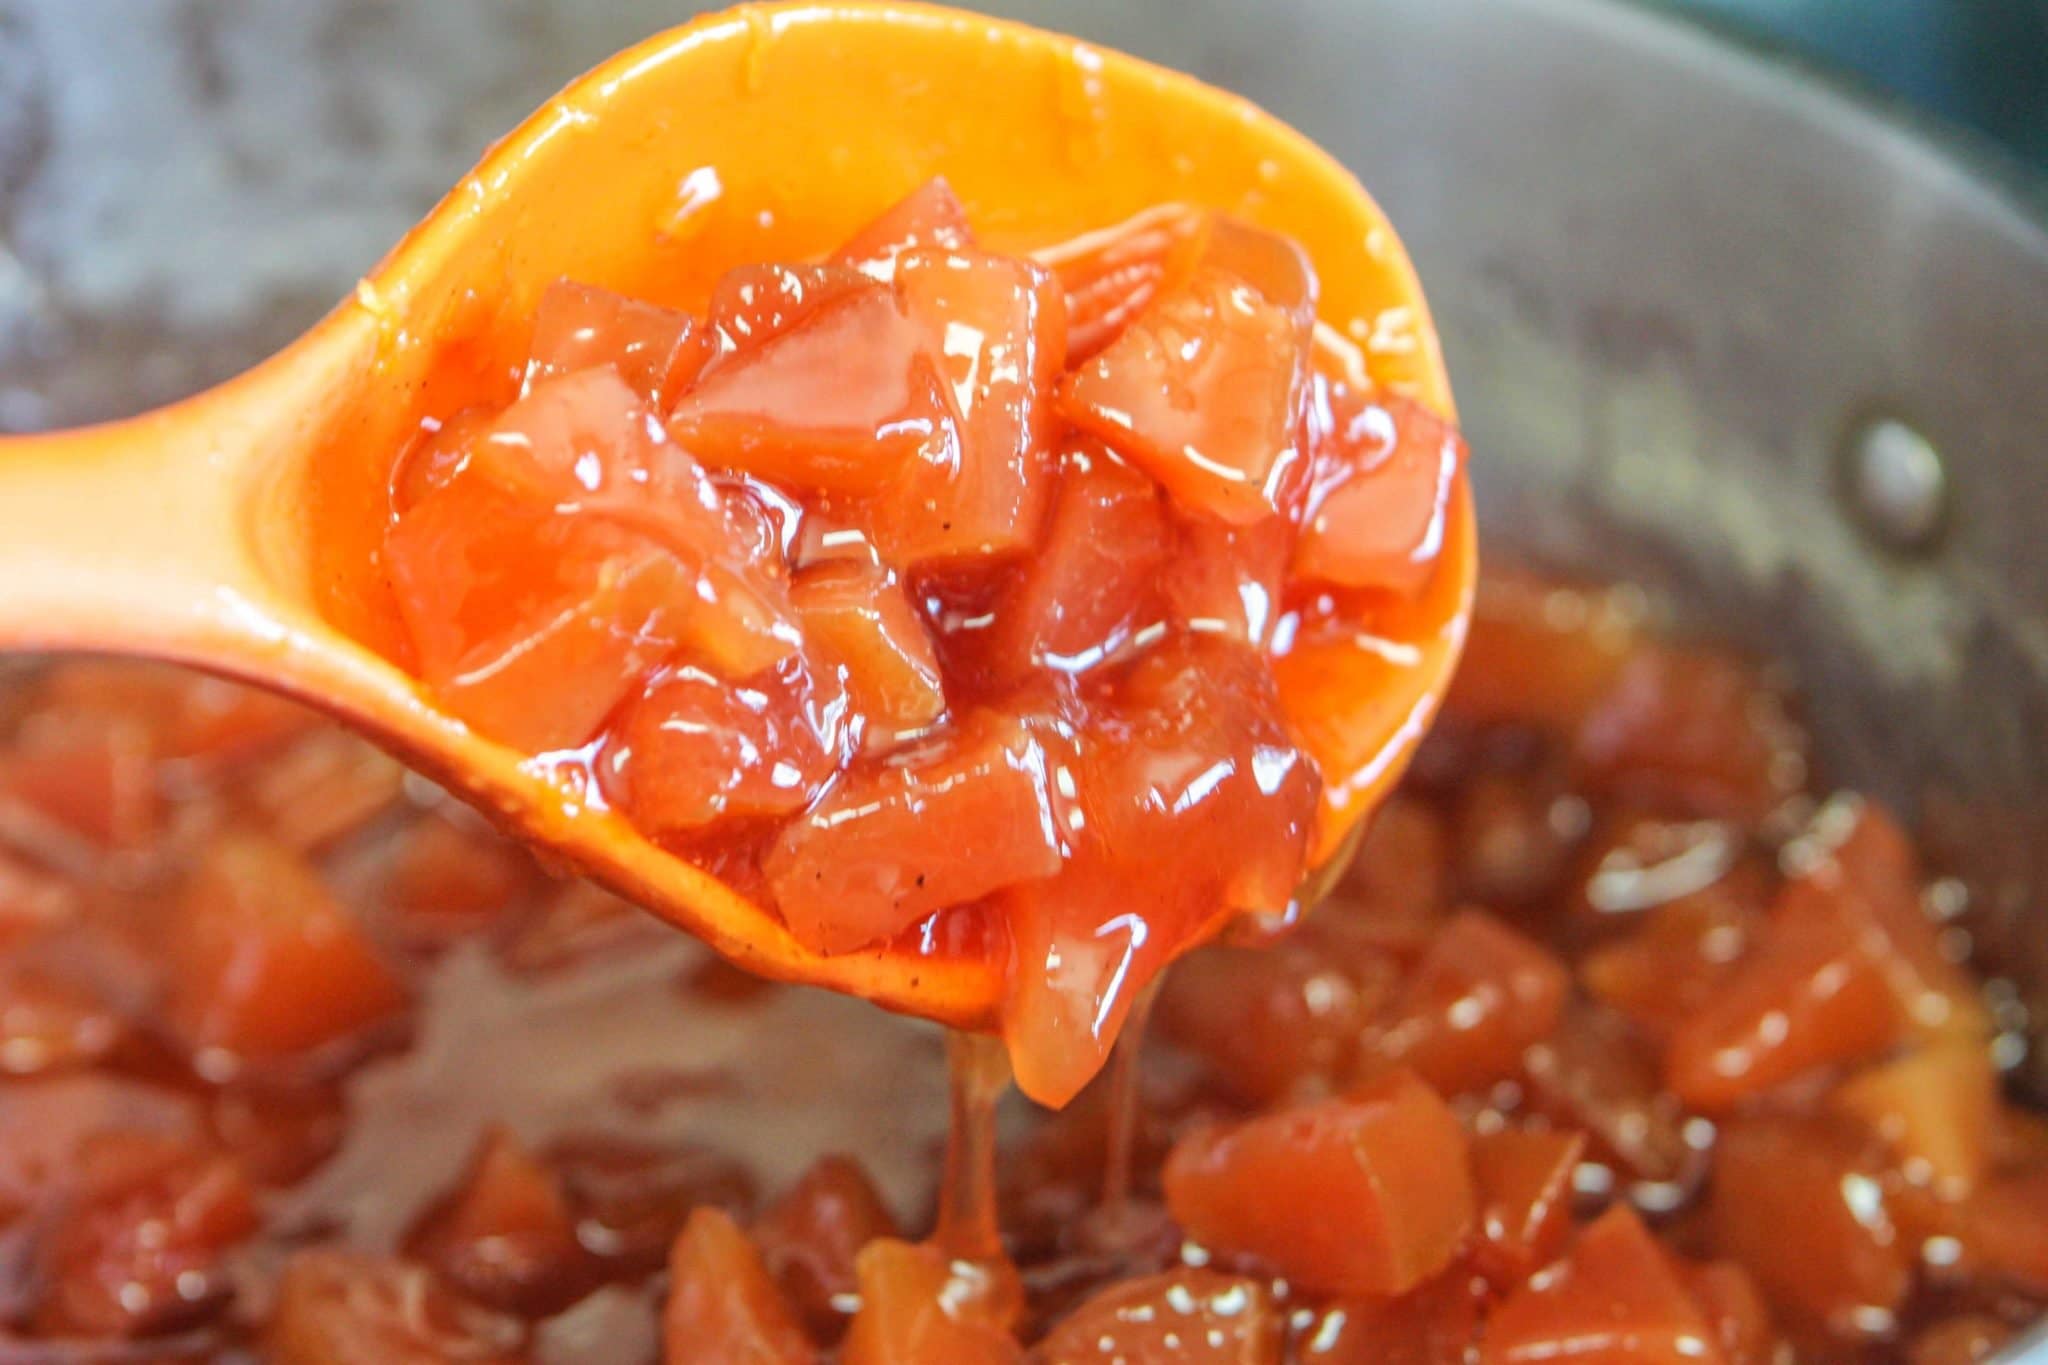 quince jam being scooped by an orange plastic spoon